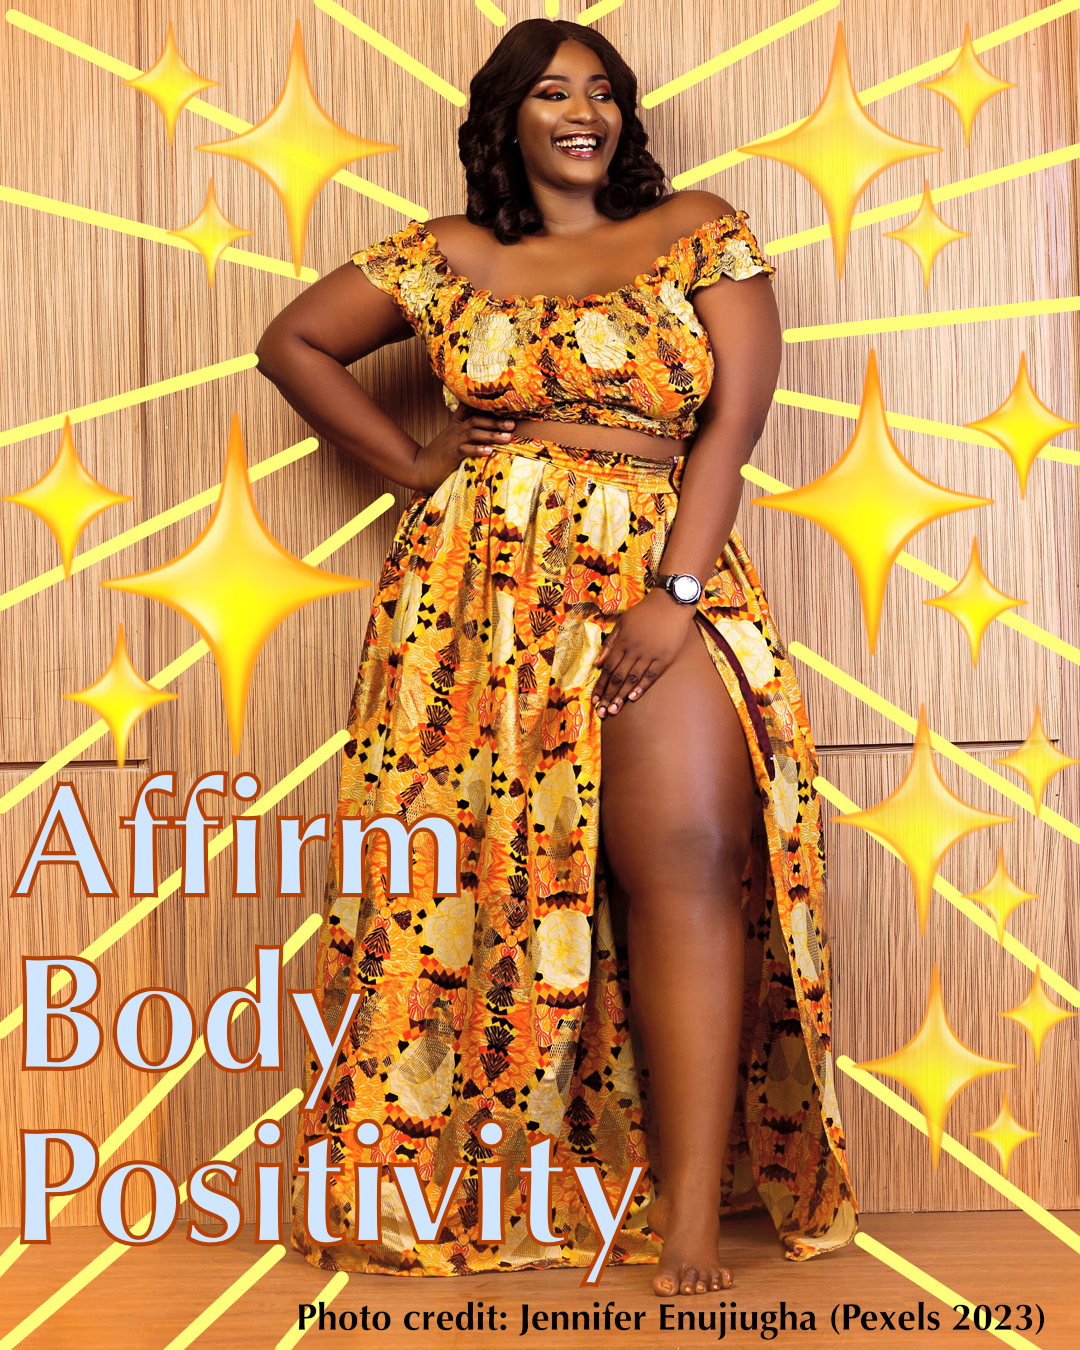 The Affirm Body Positivity Collection